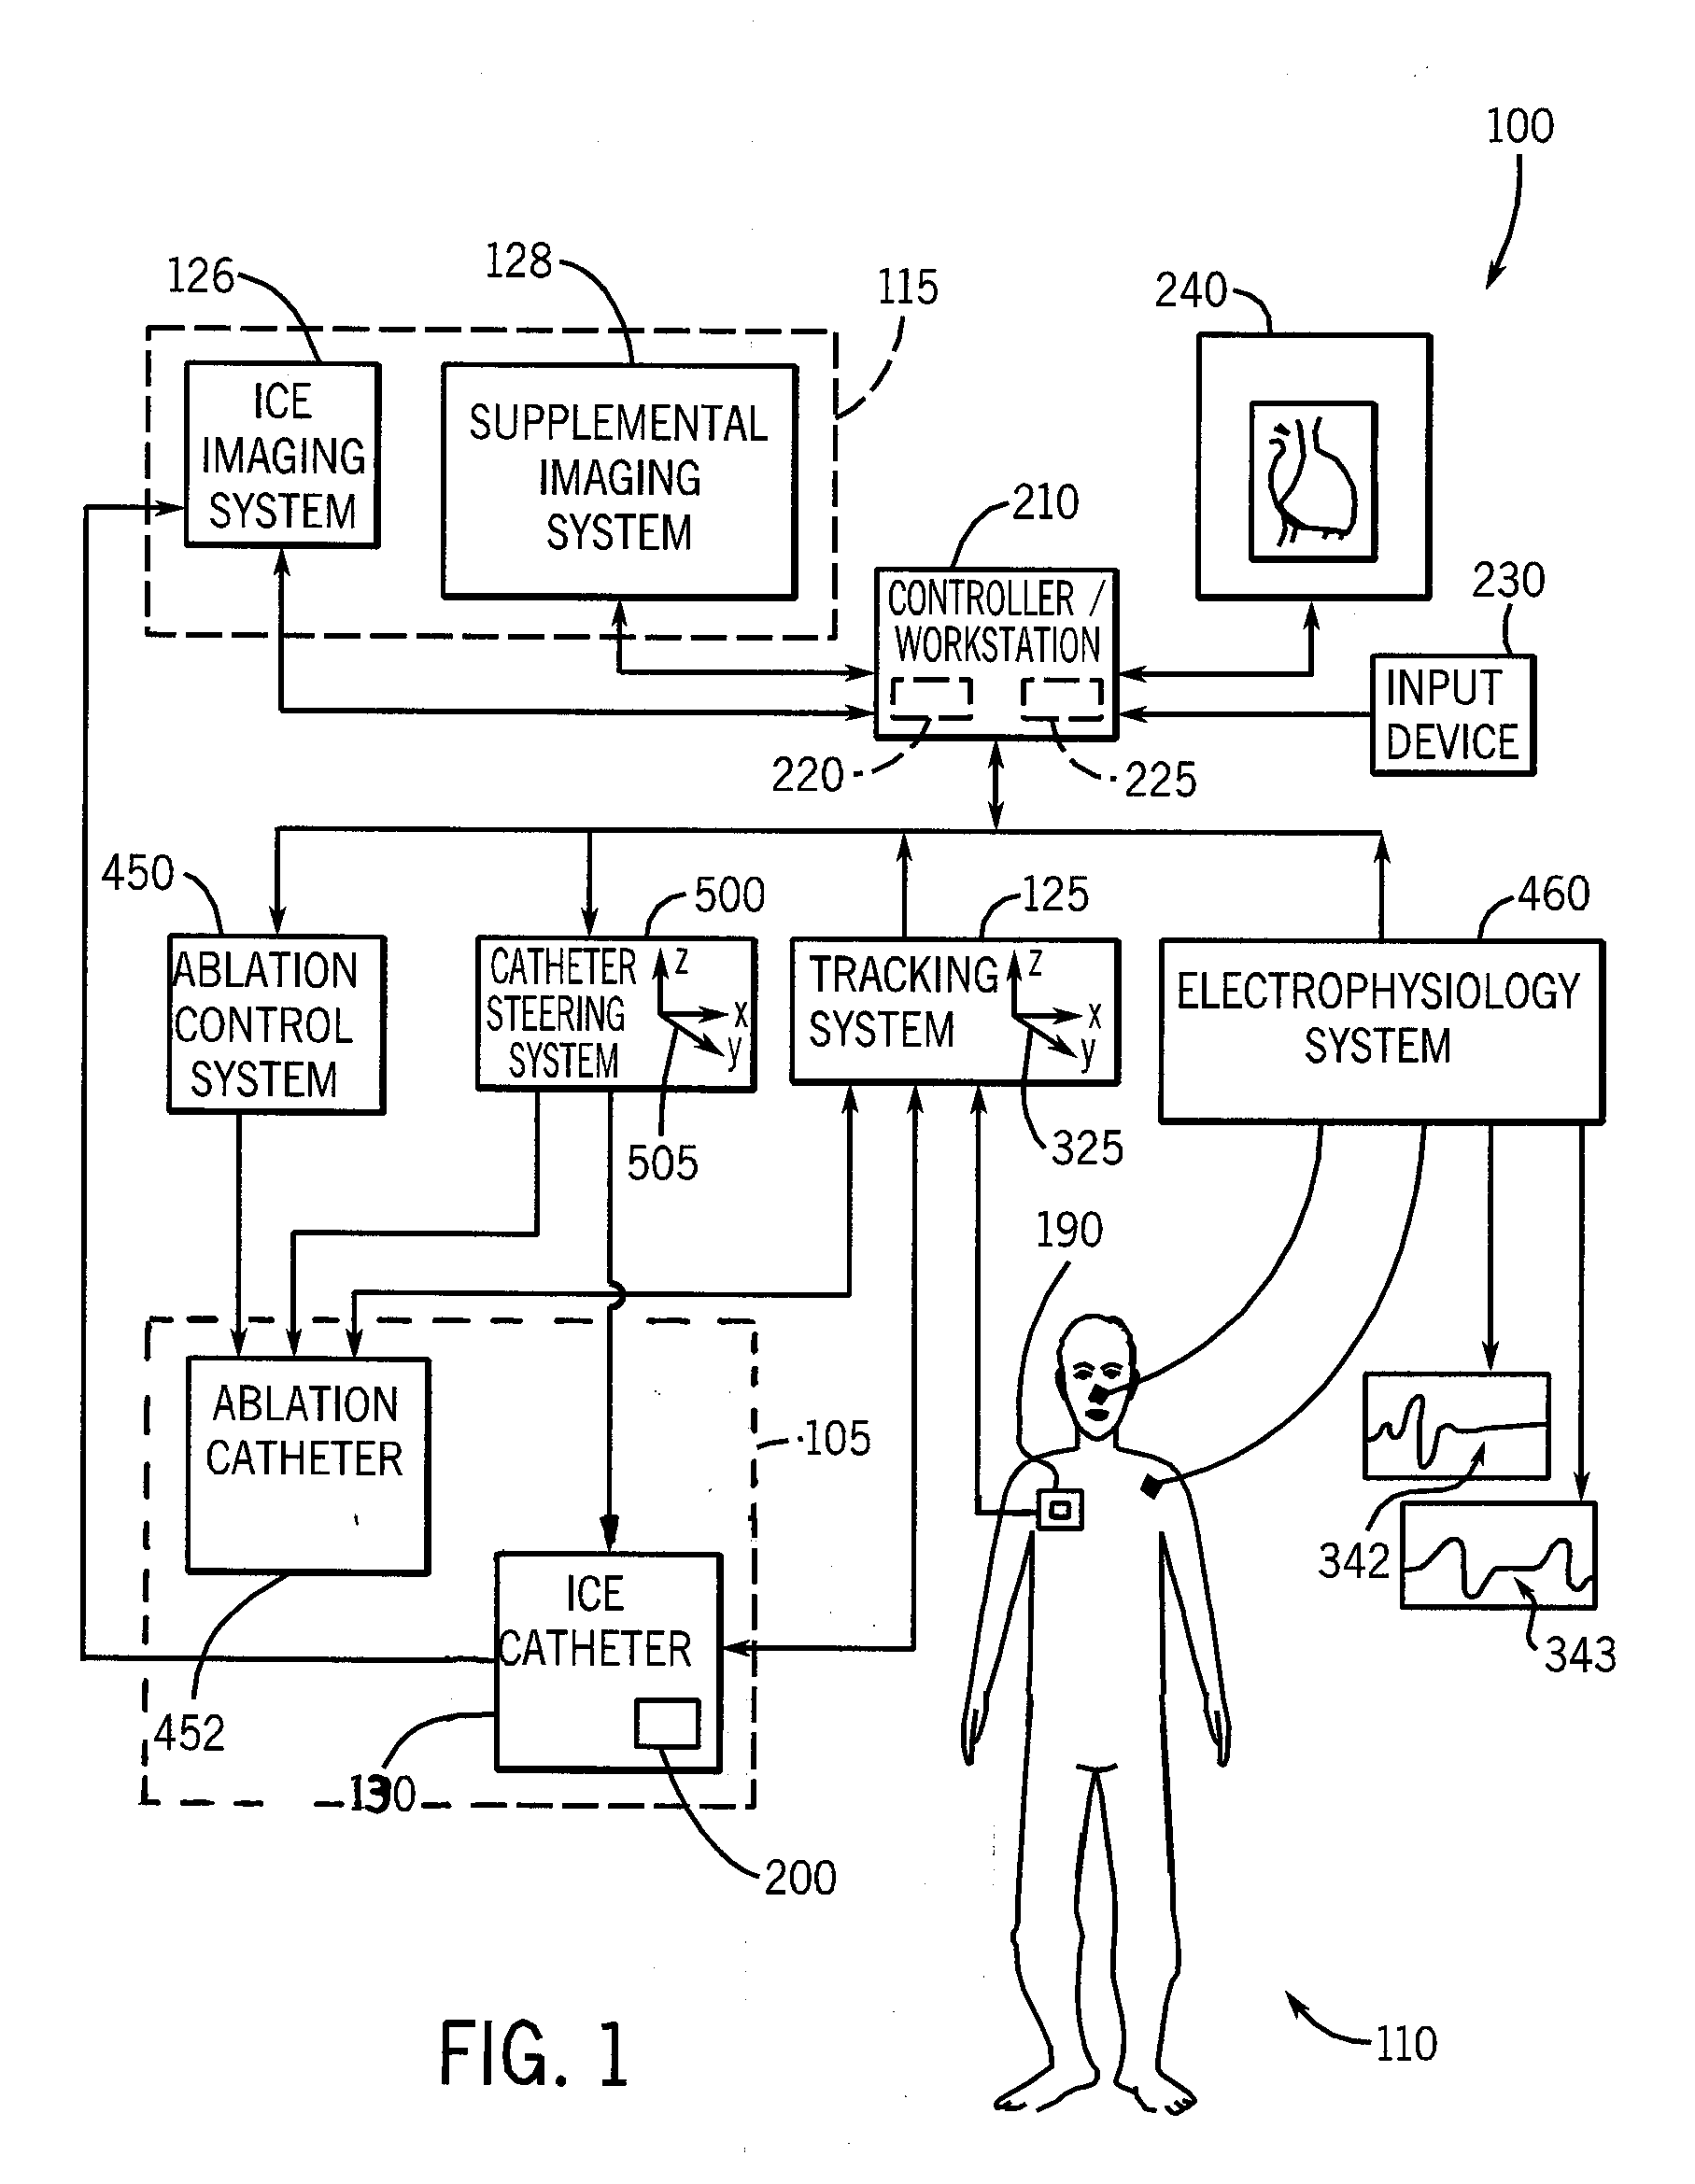 System and method to register a tracking system with an intracardiac echocardiography (ICE) imaging system